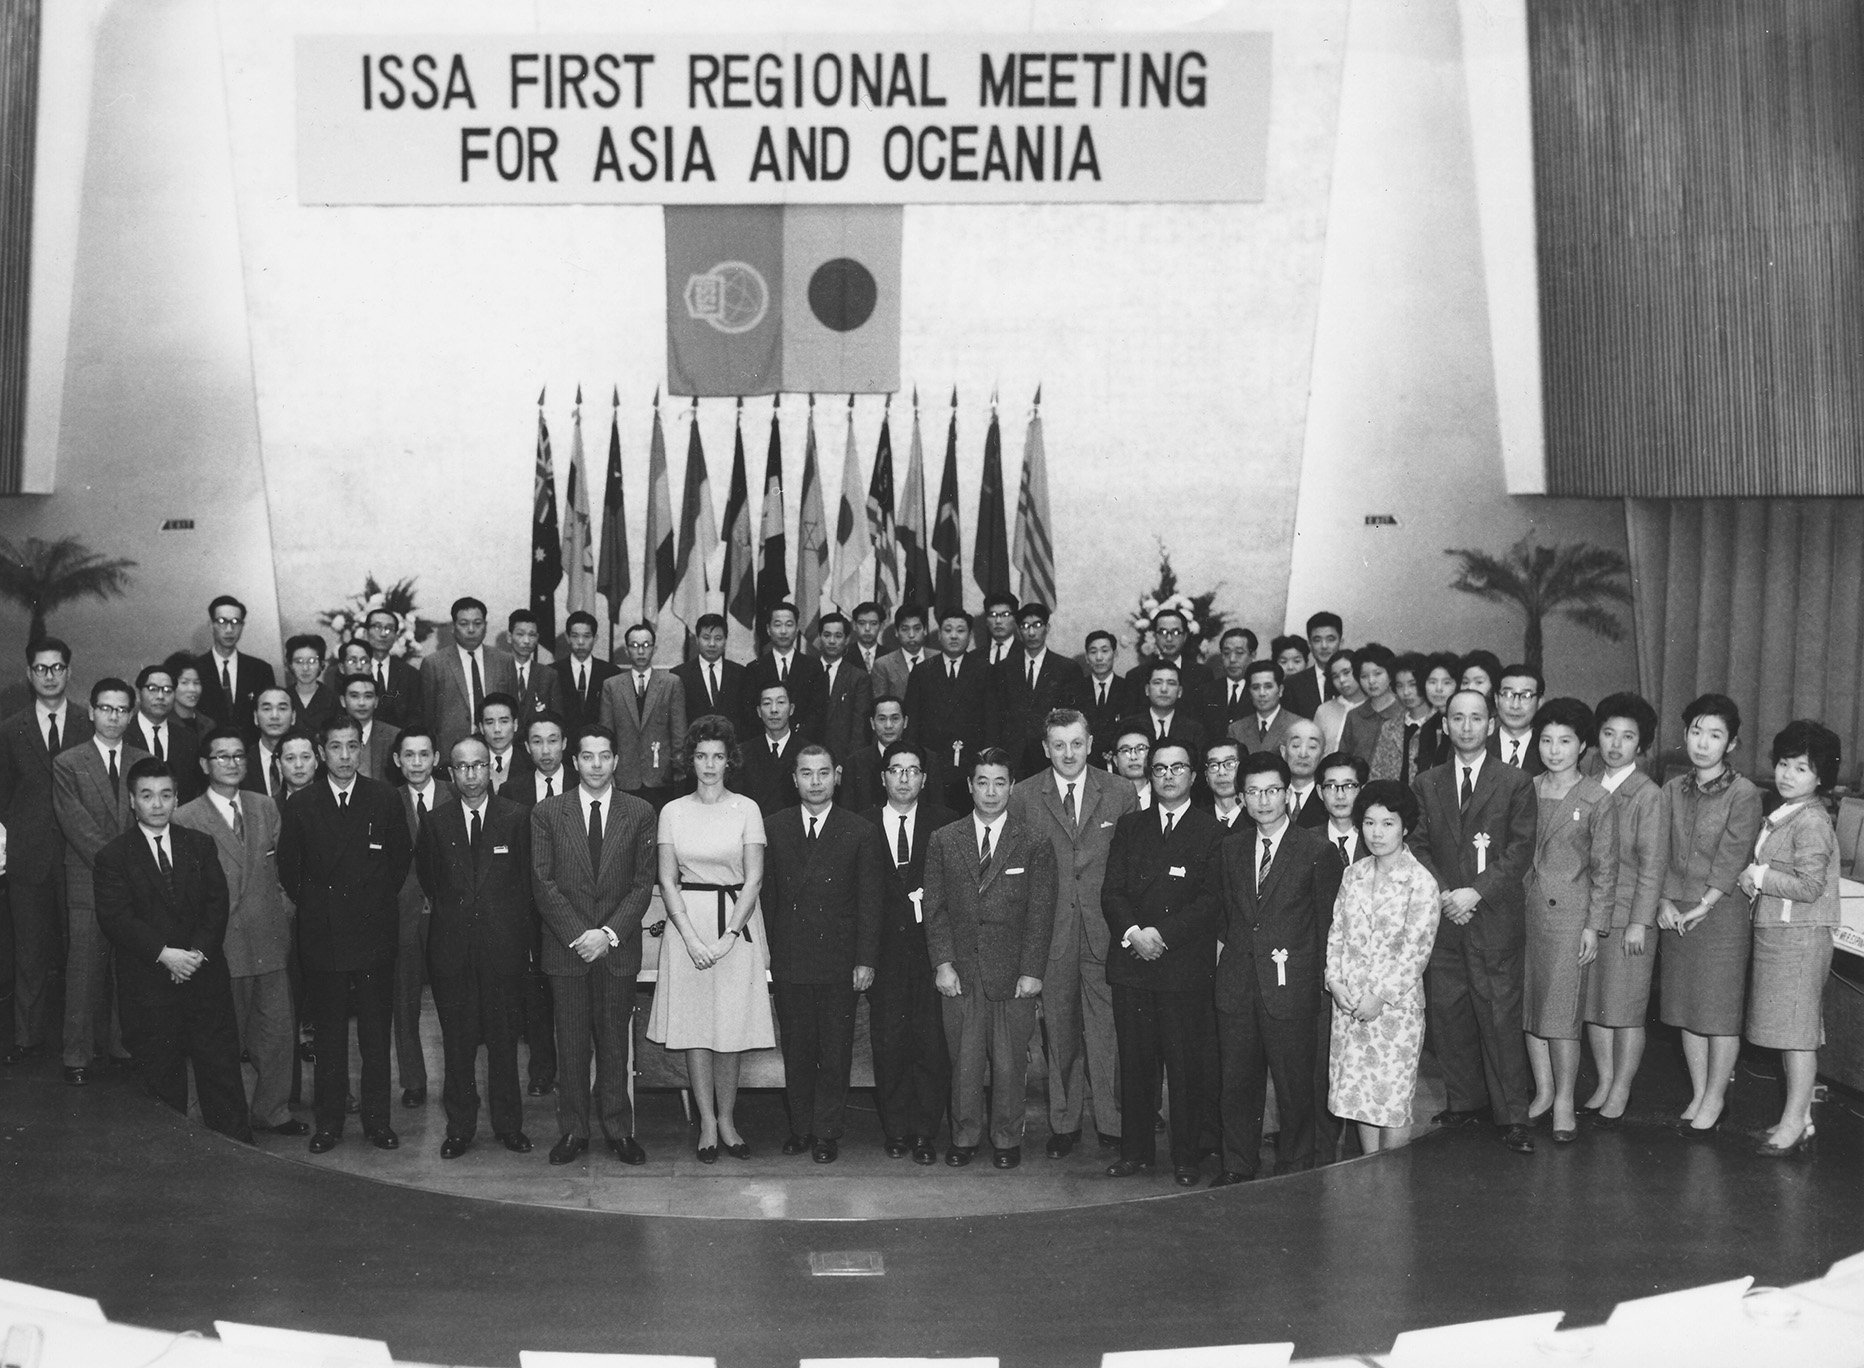 First Regional meeting for Asia and Oceania, 1962